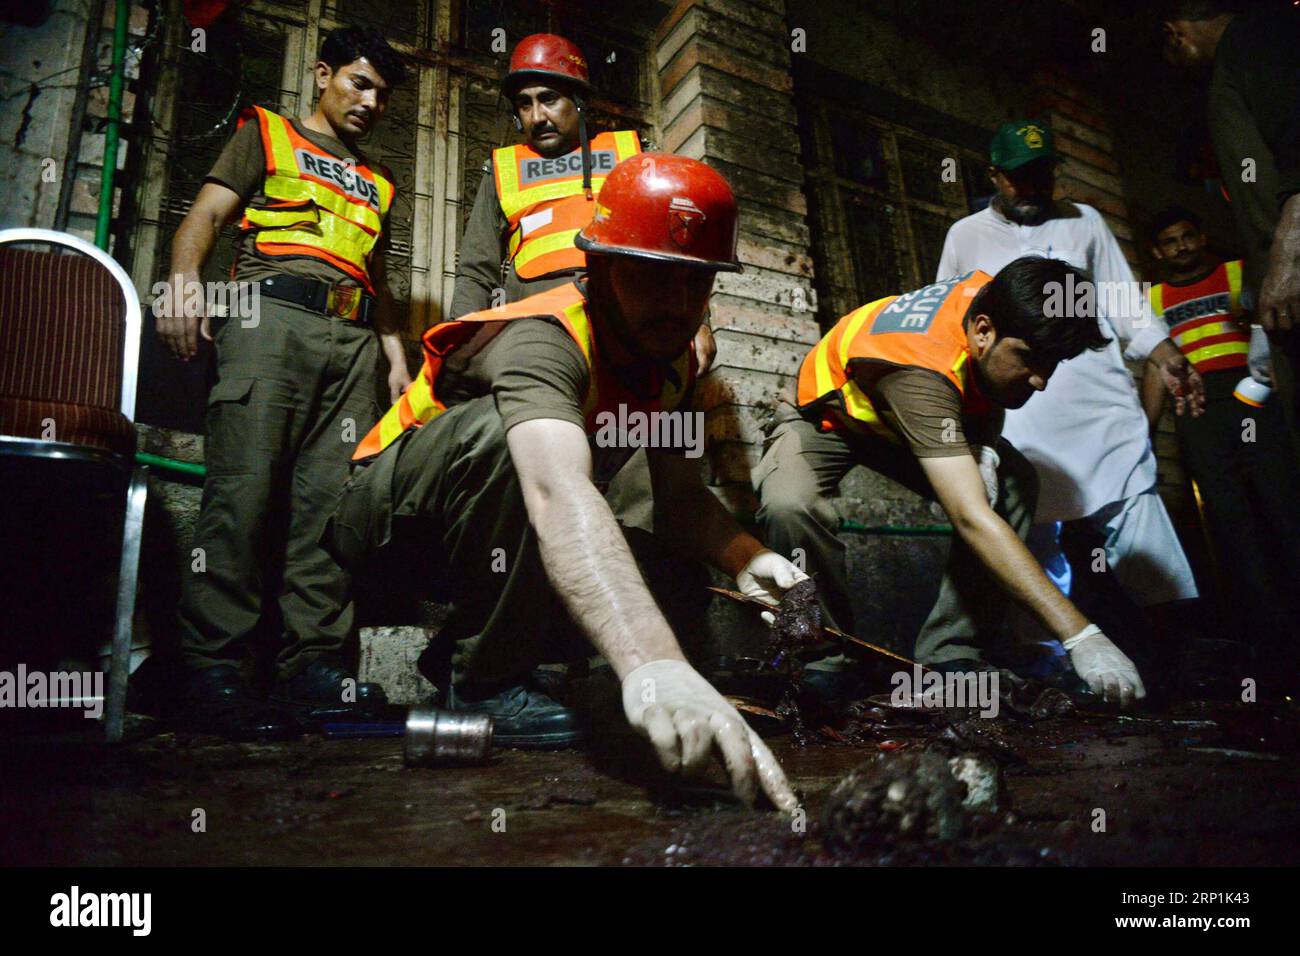 (180710) -- PESHAWAR, July 10, 2018 -- Rescuers work at the blast site in Peshawar, northwest Pakistan, on July 10, 2018. At least 13 people were killed and dozens of others injured in a blast that hit a public gathering of a political party in Pakistan s northwest provincial capital of Peshawar on Tuesday night, local media reported. ) PAKISTAN-PESHAWAR-BLAST UmarxQayyum PUBLICATIONxNOTxINxCHN Stock Photo